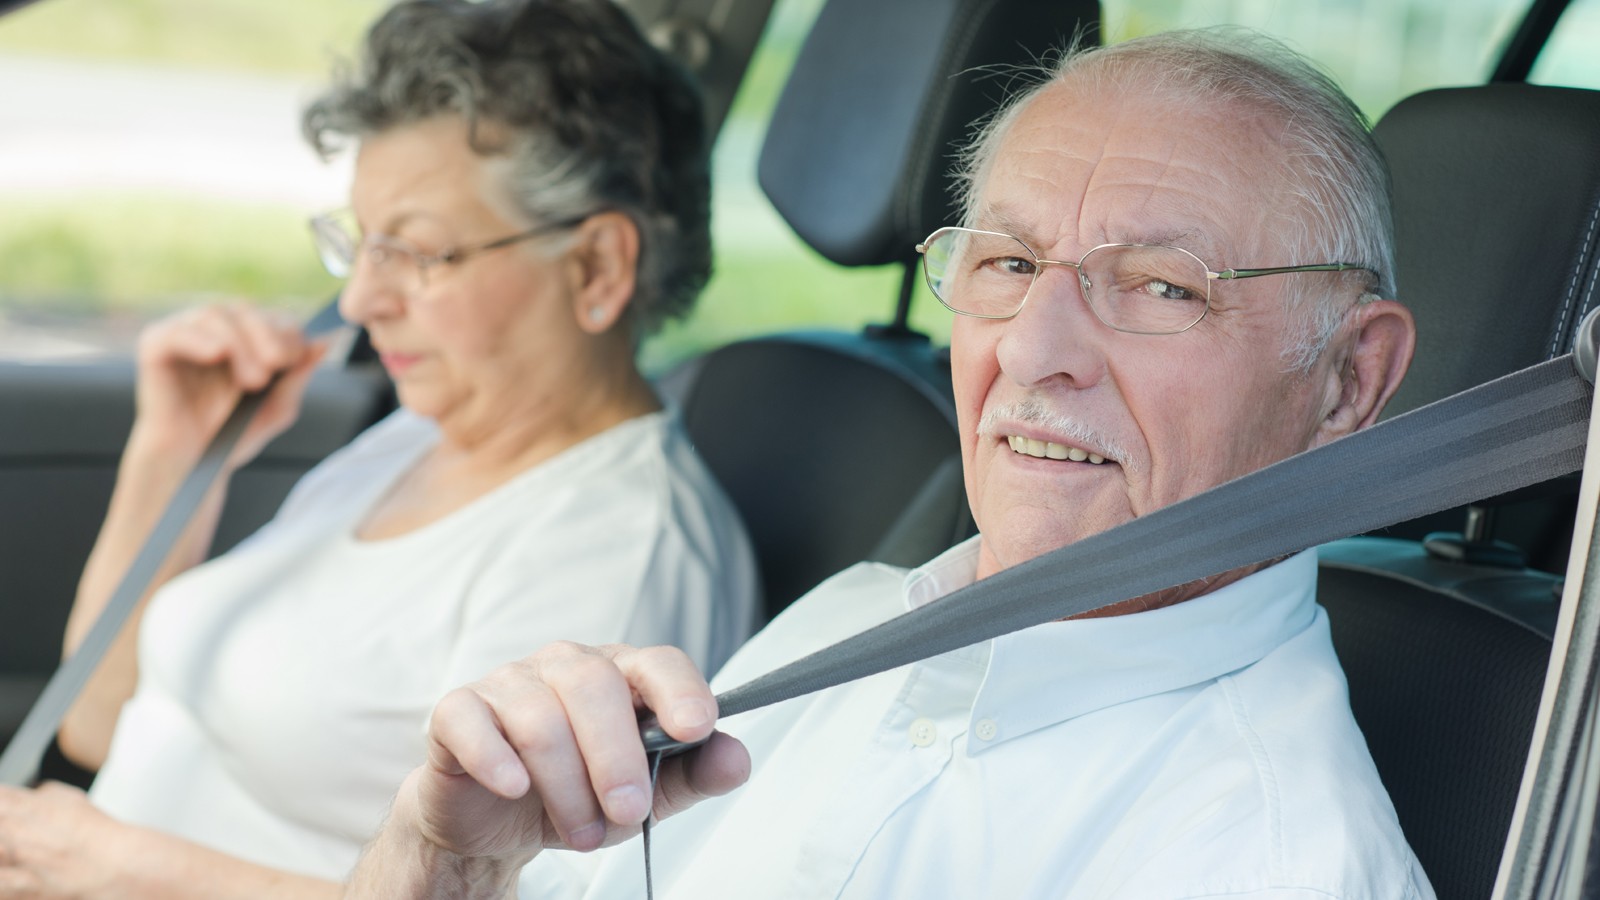 Elderly couple putting on their seatbelts